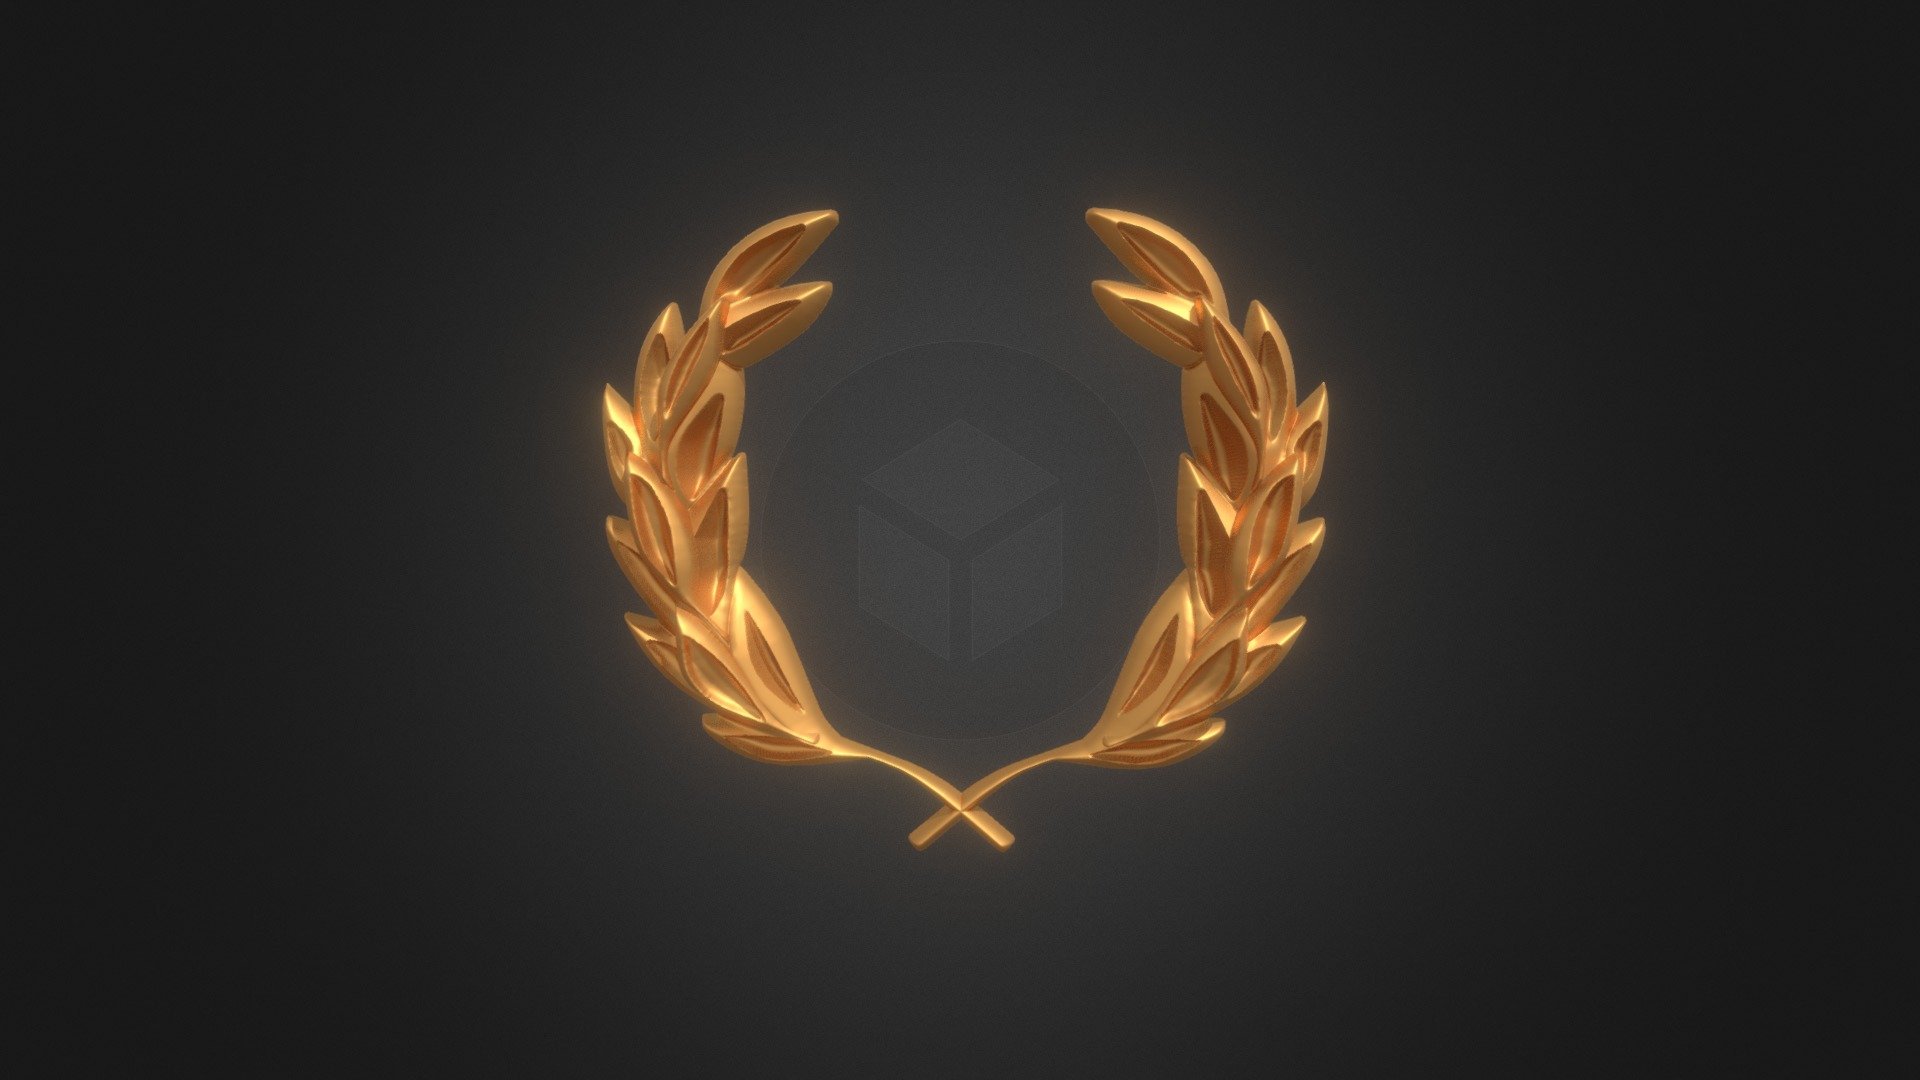 Wreath Award Badge Design ready for 3d print, 
two crop leaves design
size: width wise 18 mm
Height and thickness proportionally - Wreath Award Badge Design - 3D model by Xpert3d (@3drhino) 3d model